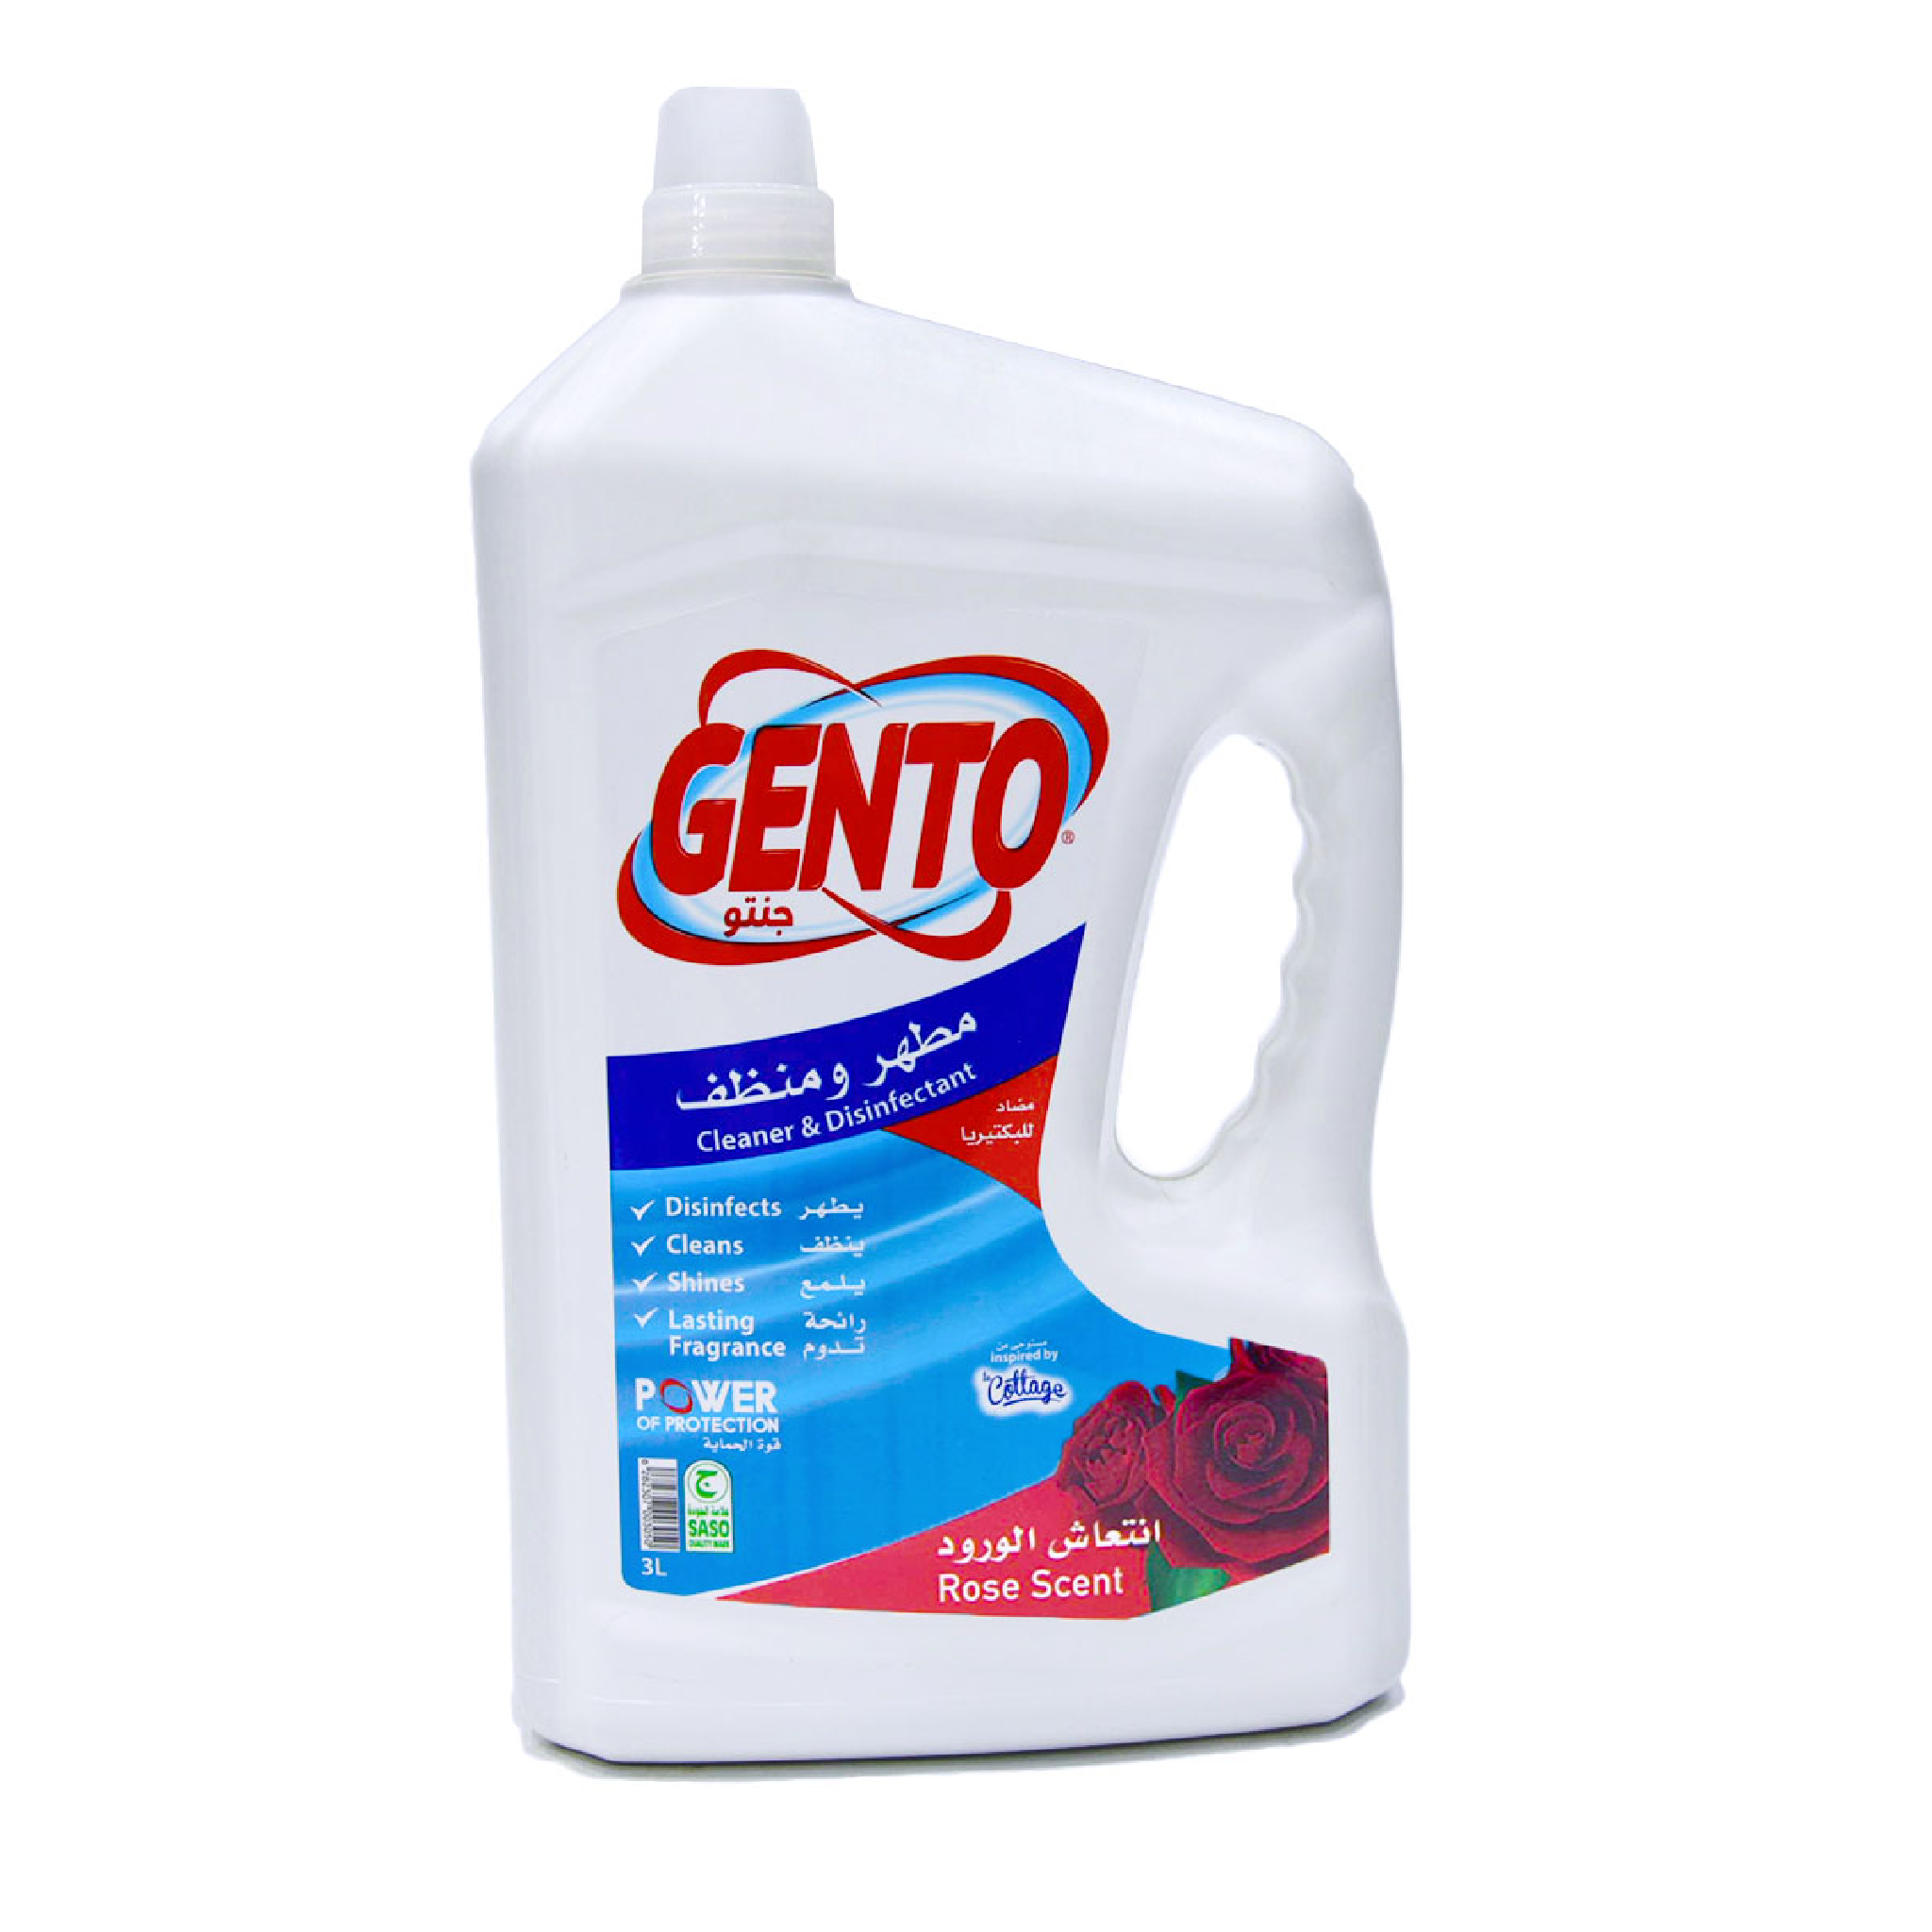 Gento Cleaner & Disinfectant 3L